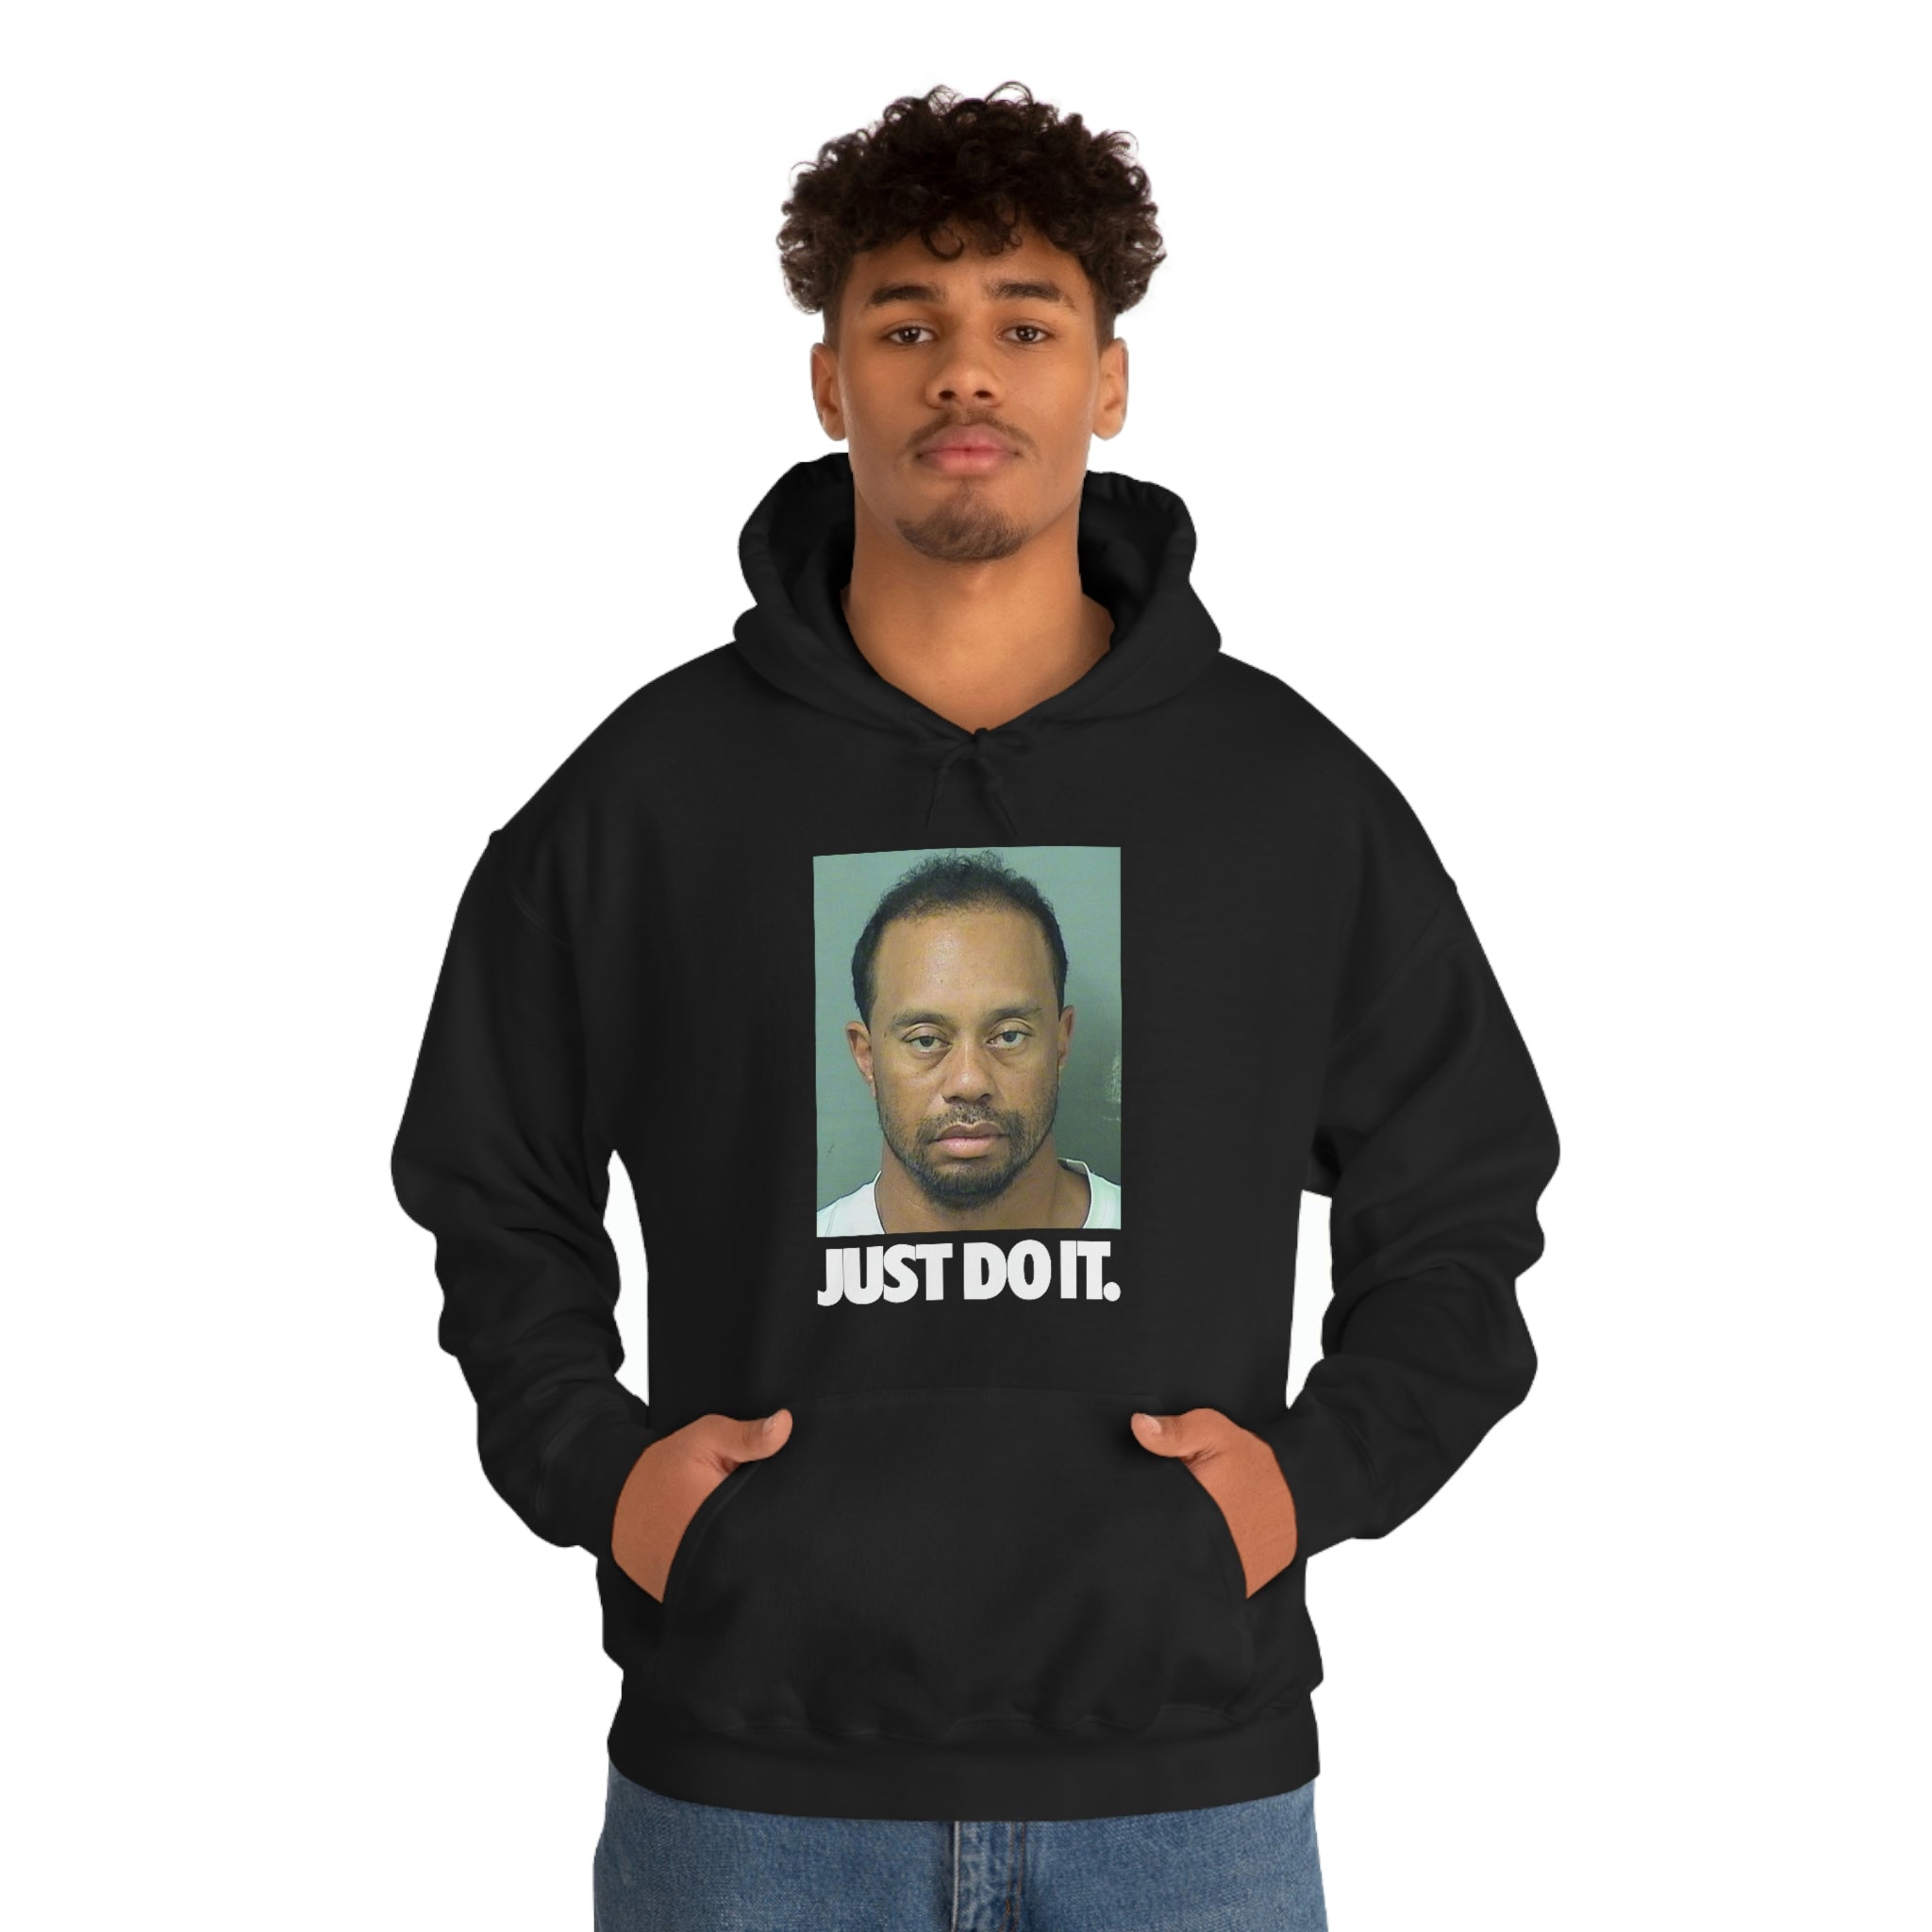 Tiger Woods DUI Just Do it - Unisex Heavy Blend™ Hooded Sweatshirt - ALL COLORS